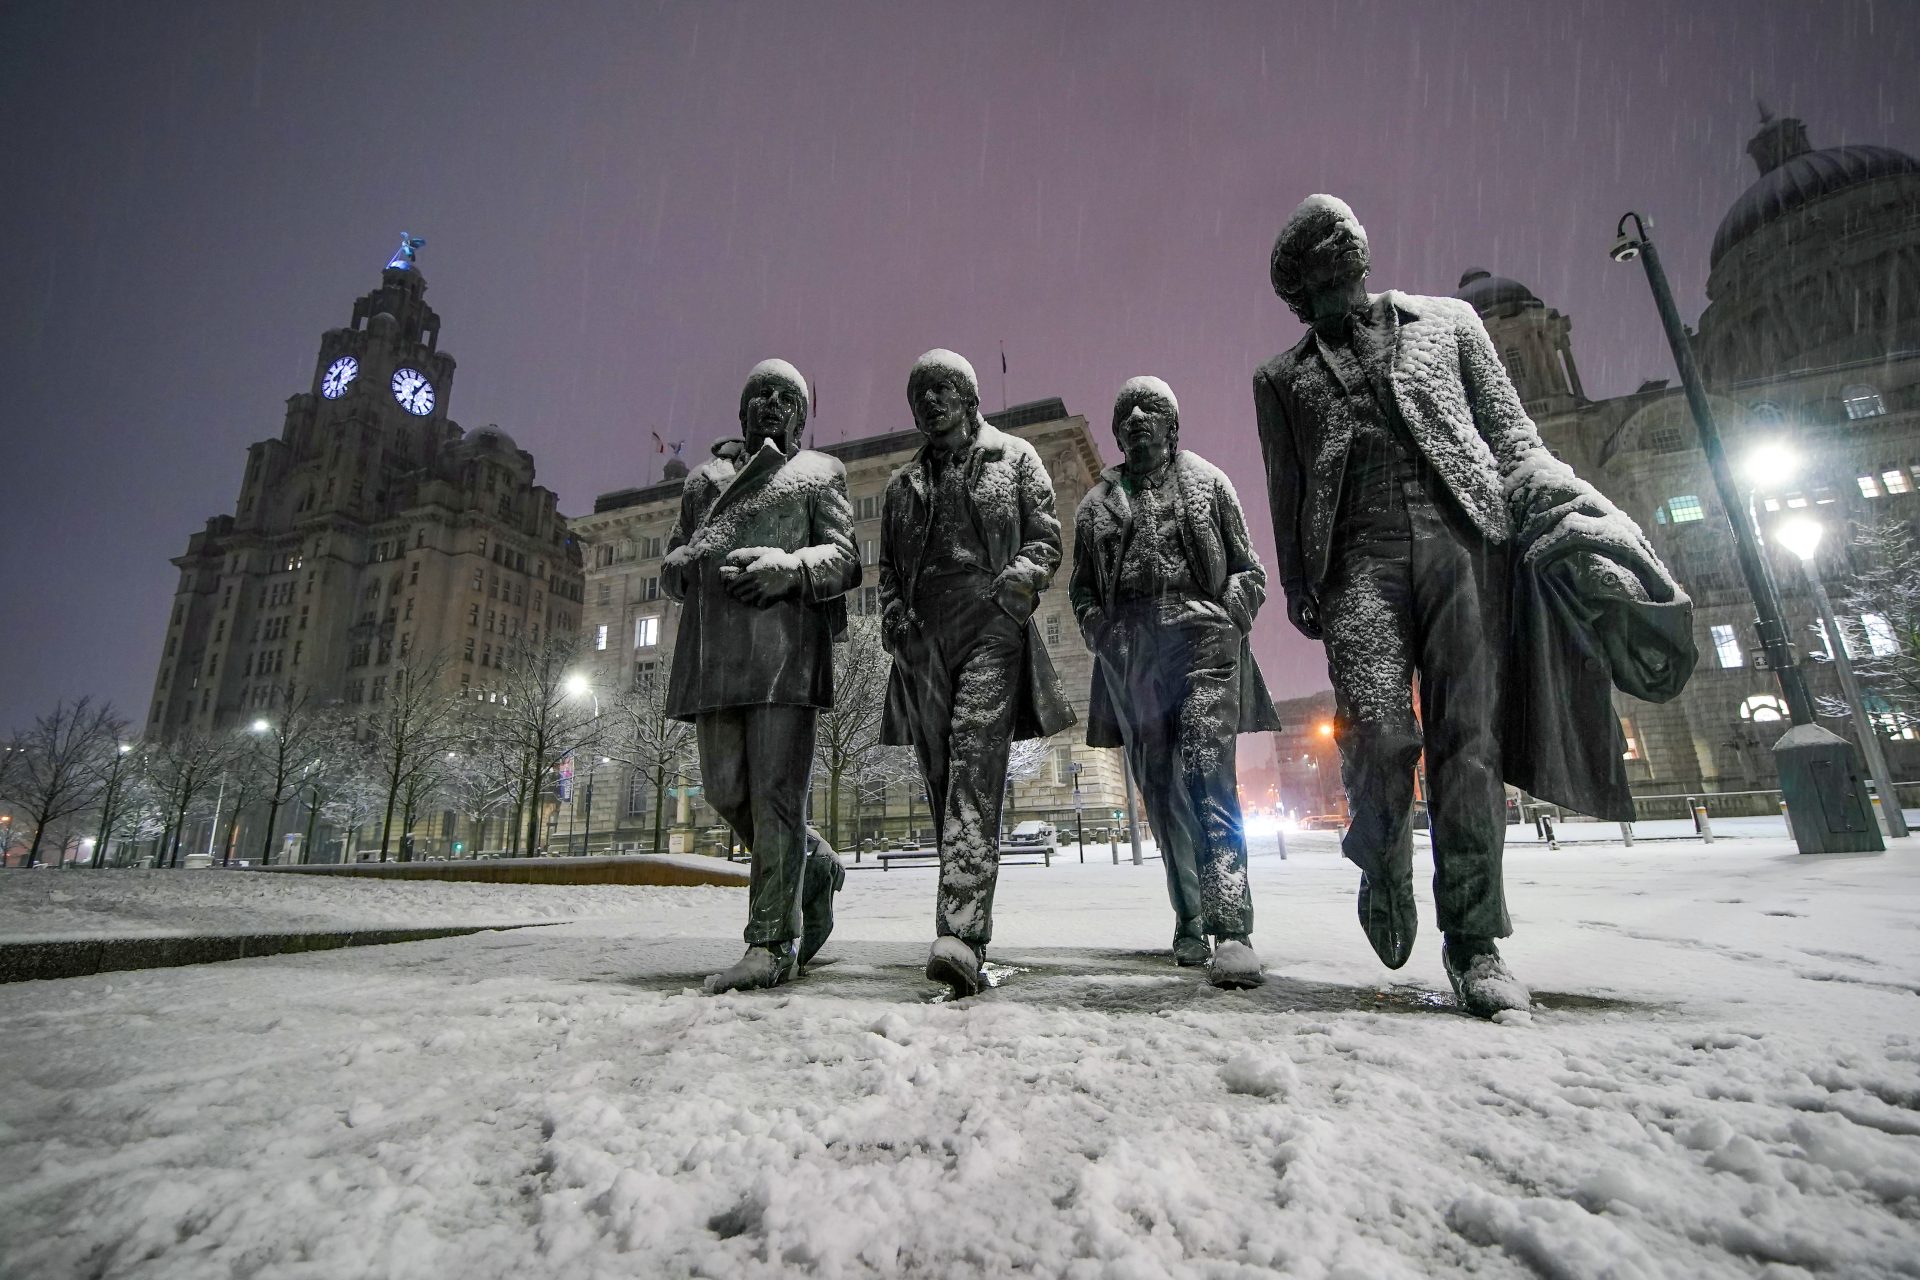 The Beatles under the snow